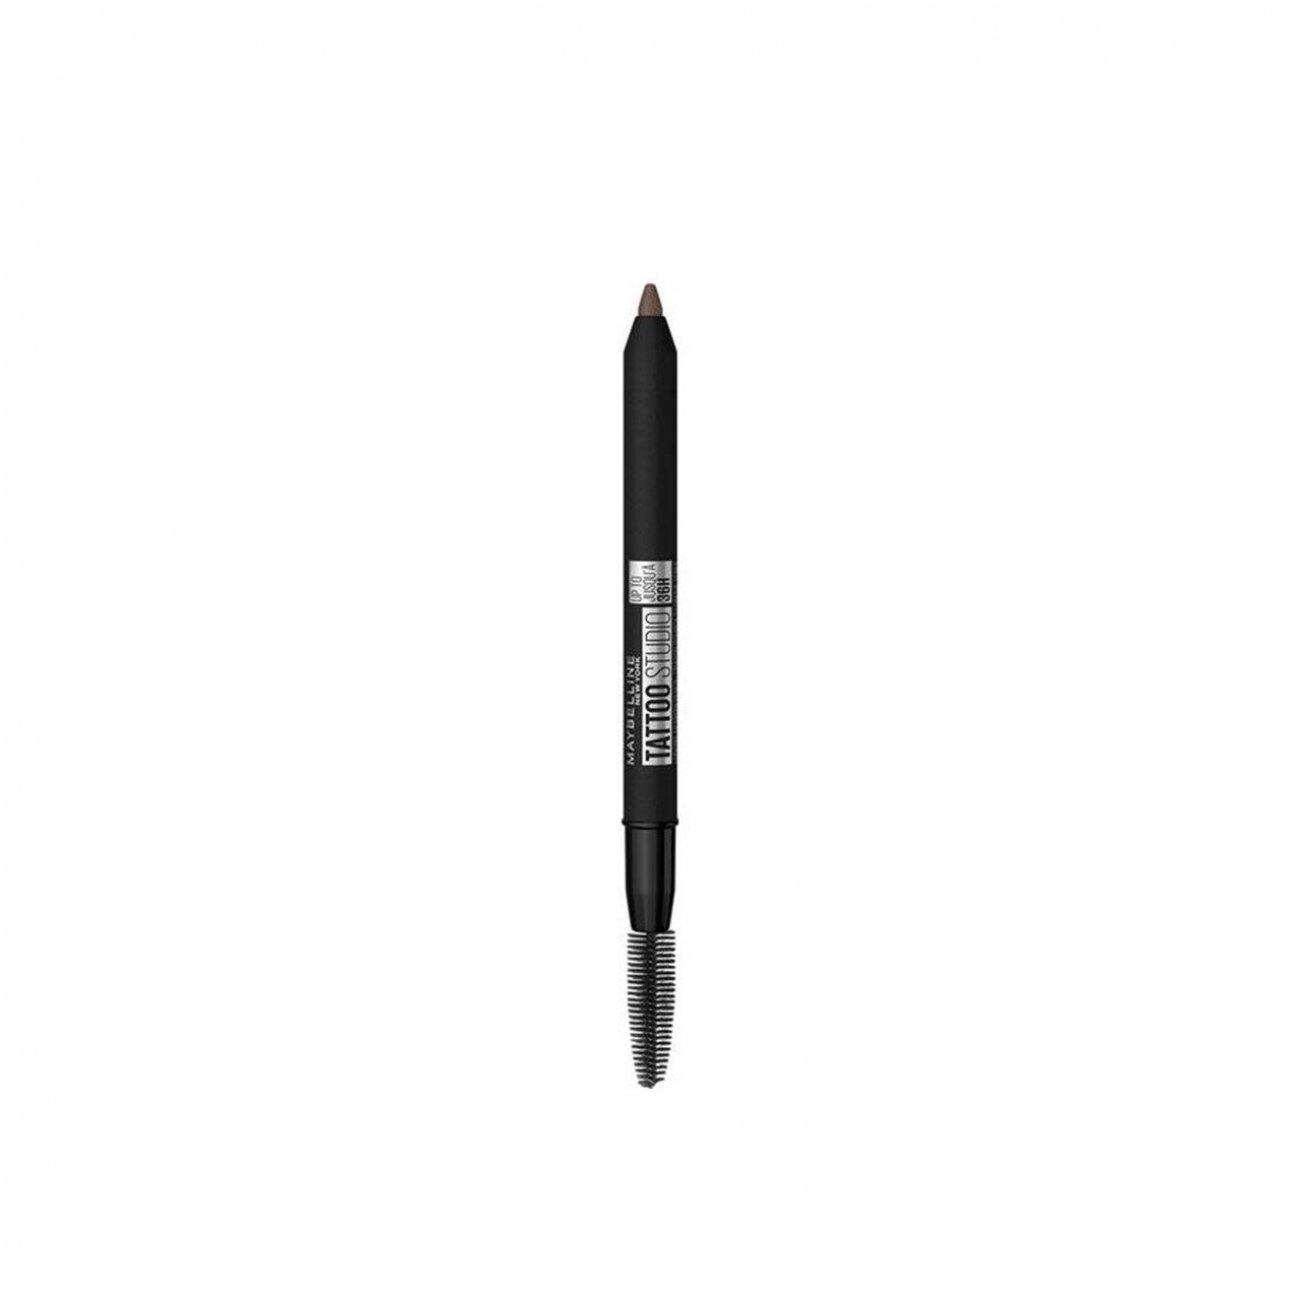 MAYBELLINE  TATTOO BROW 36HR PIGMENT BROW PENCIL  REVIEW